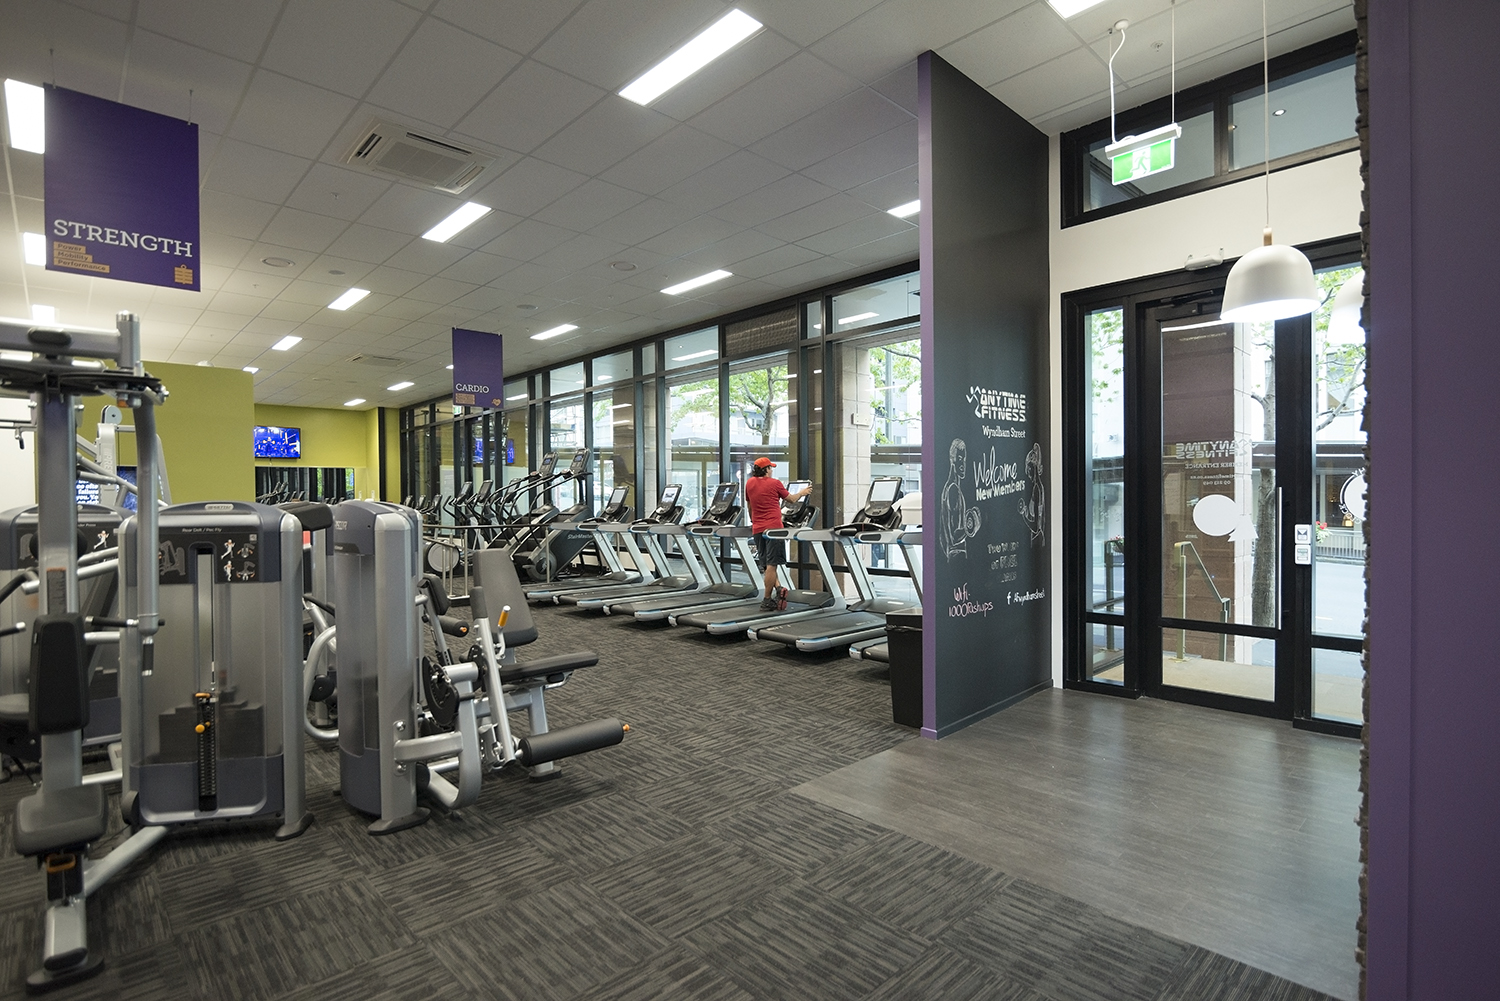 30 Minute Anytime Fitness Gym Membership Prices Sydney for Build Muscle